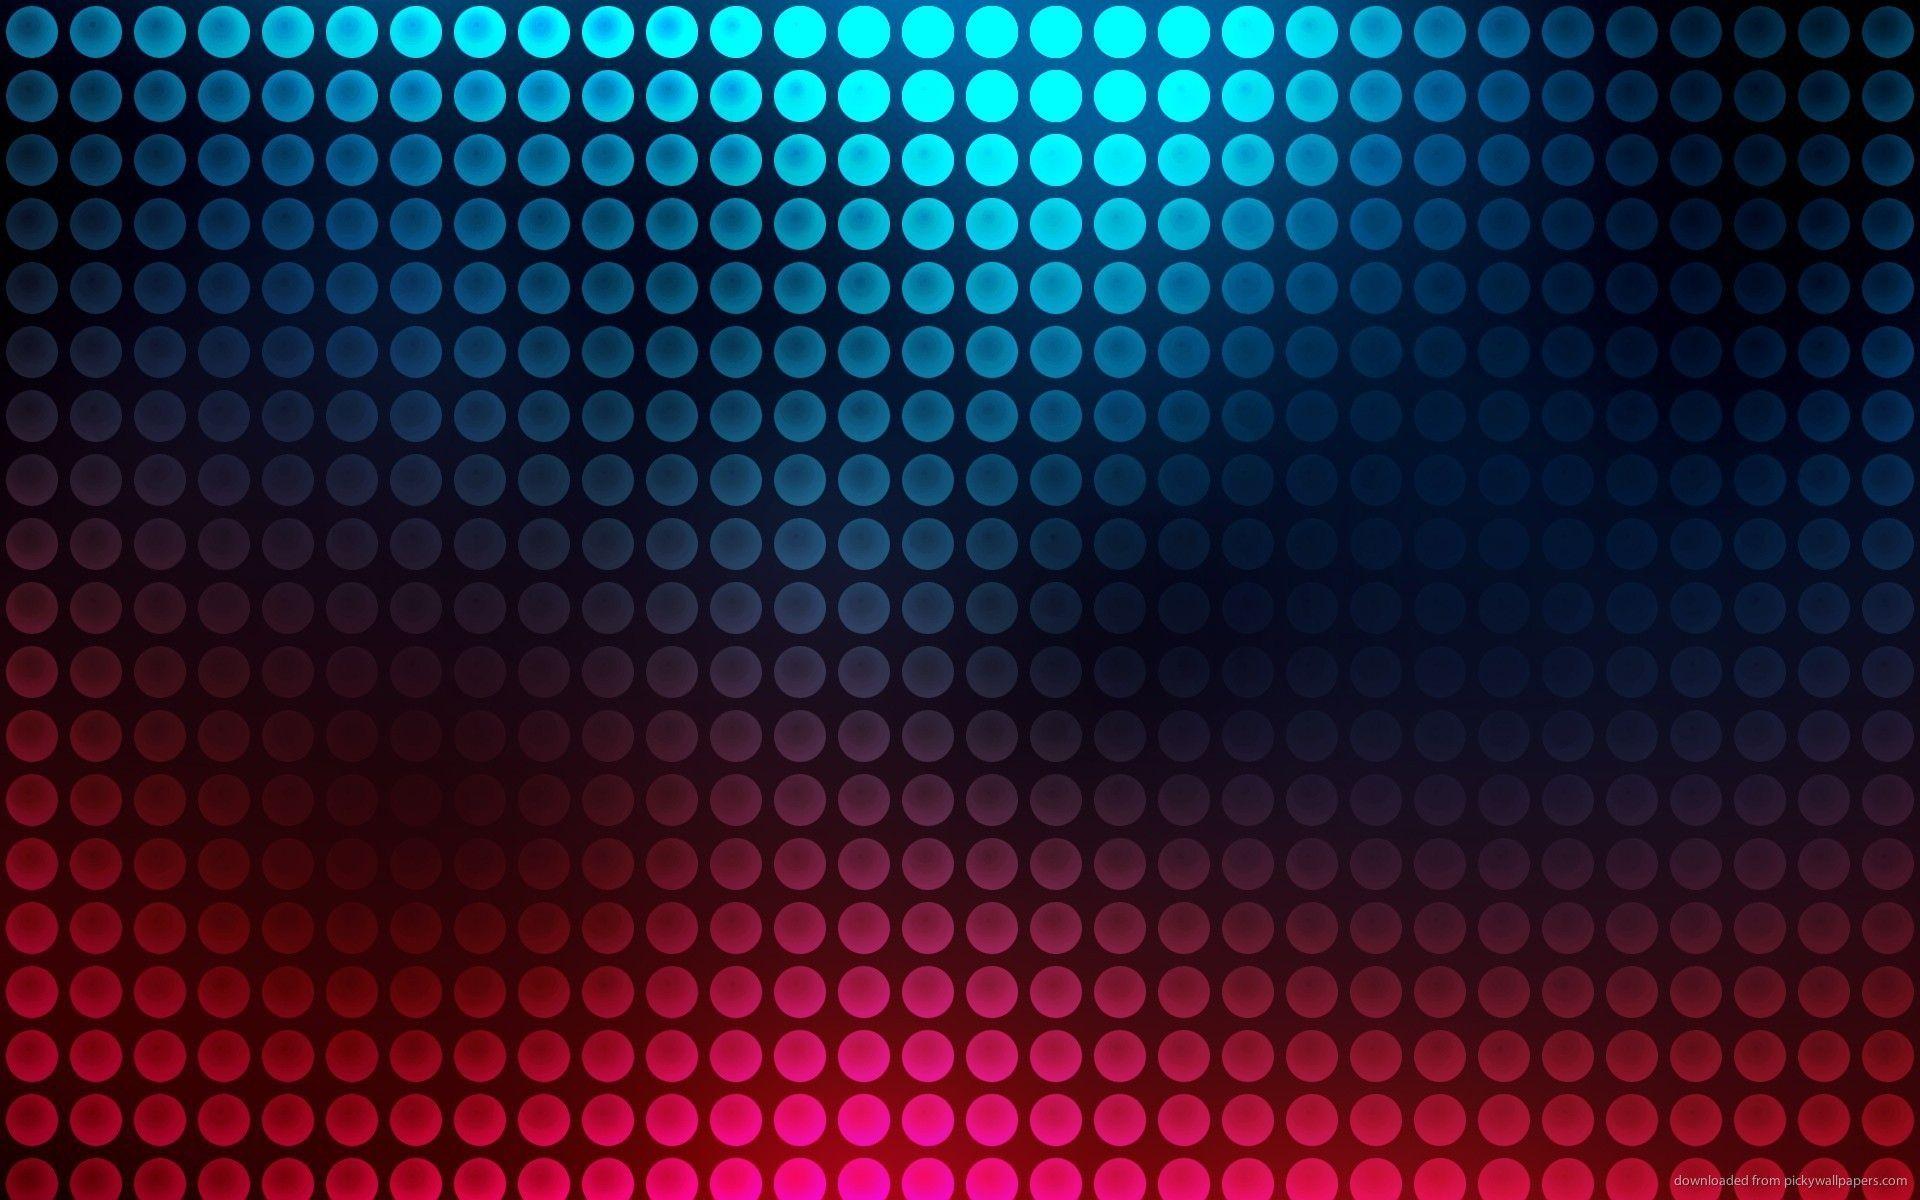 Download 1920x1200 Pink And Blue Gradient Spheres Wallpaper